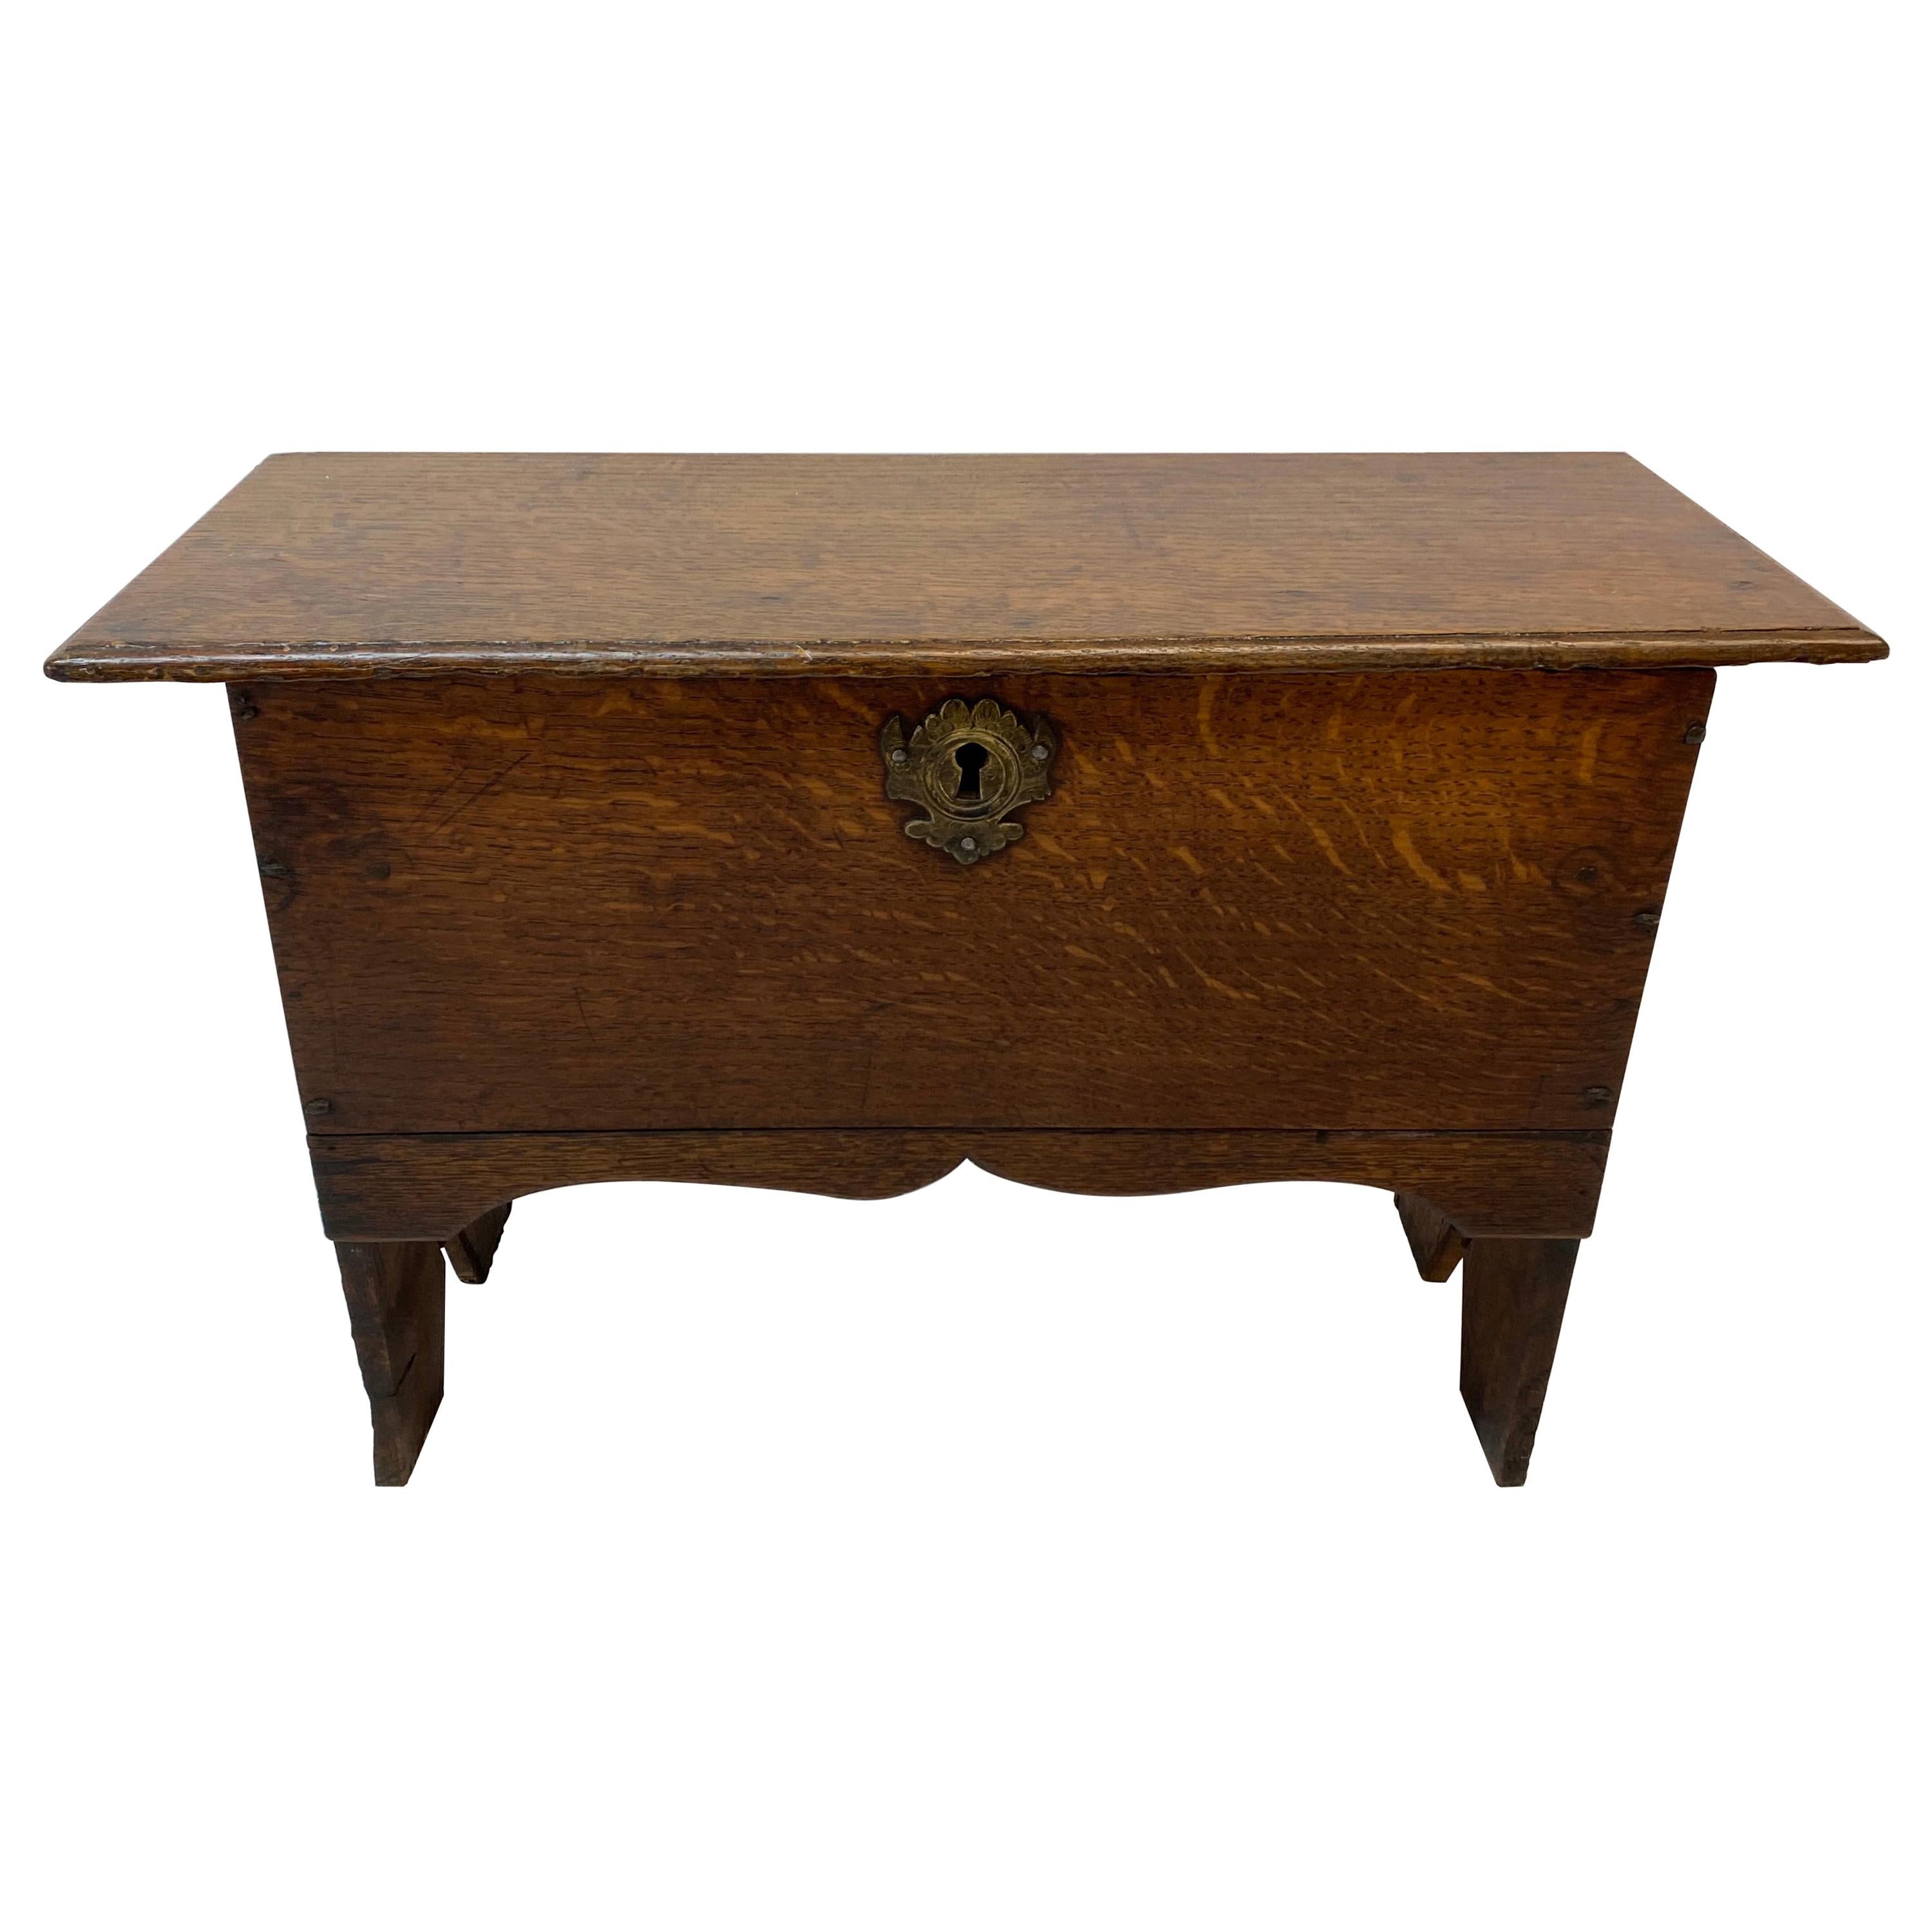 18th to 19th Century Lidded Oak Low Stool with Interior Storage For Sale